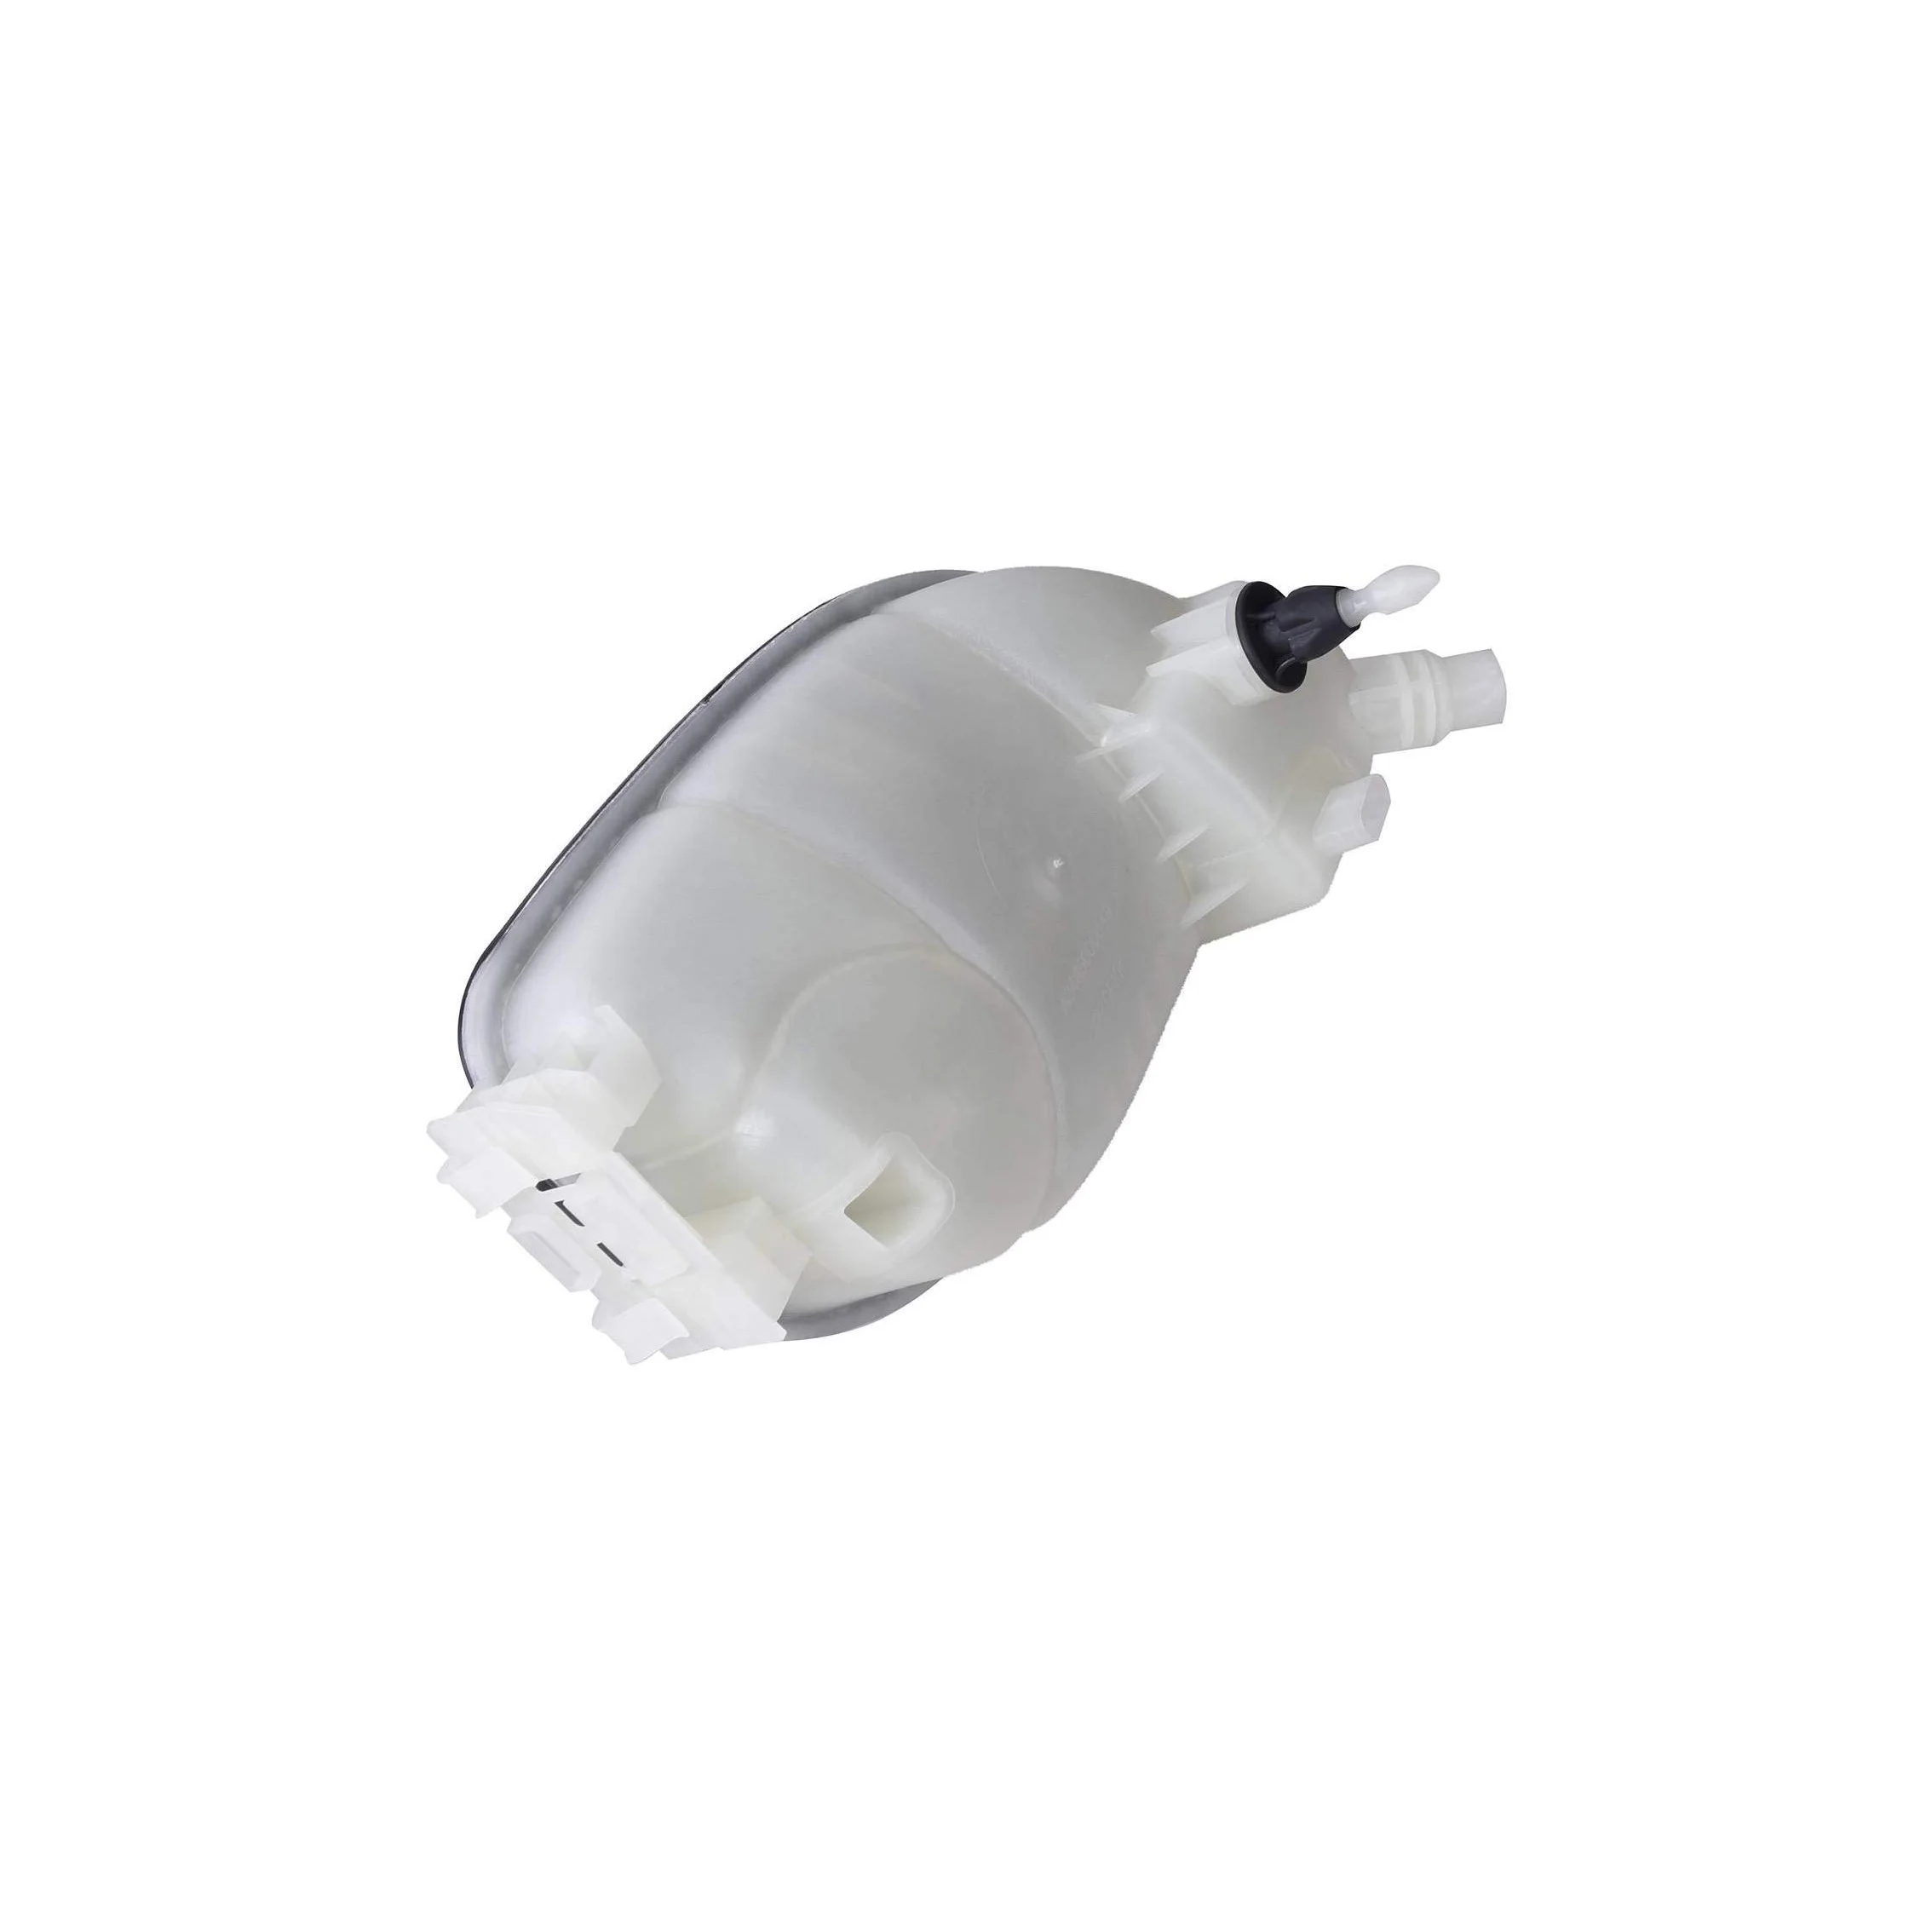 Nrpfell Car Expansion Water Tank for Mercedes A-Class A180 A200 A260 A45 B180 B200 B260 W246 W176 2465000049 